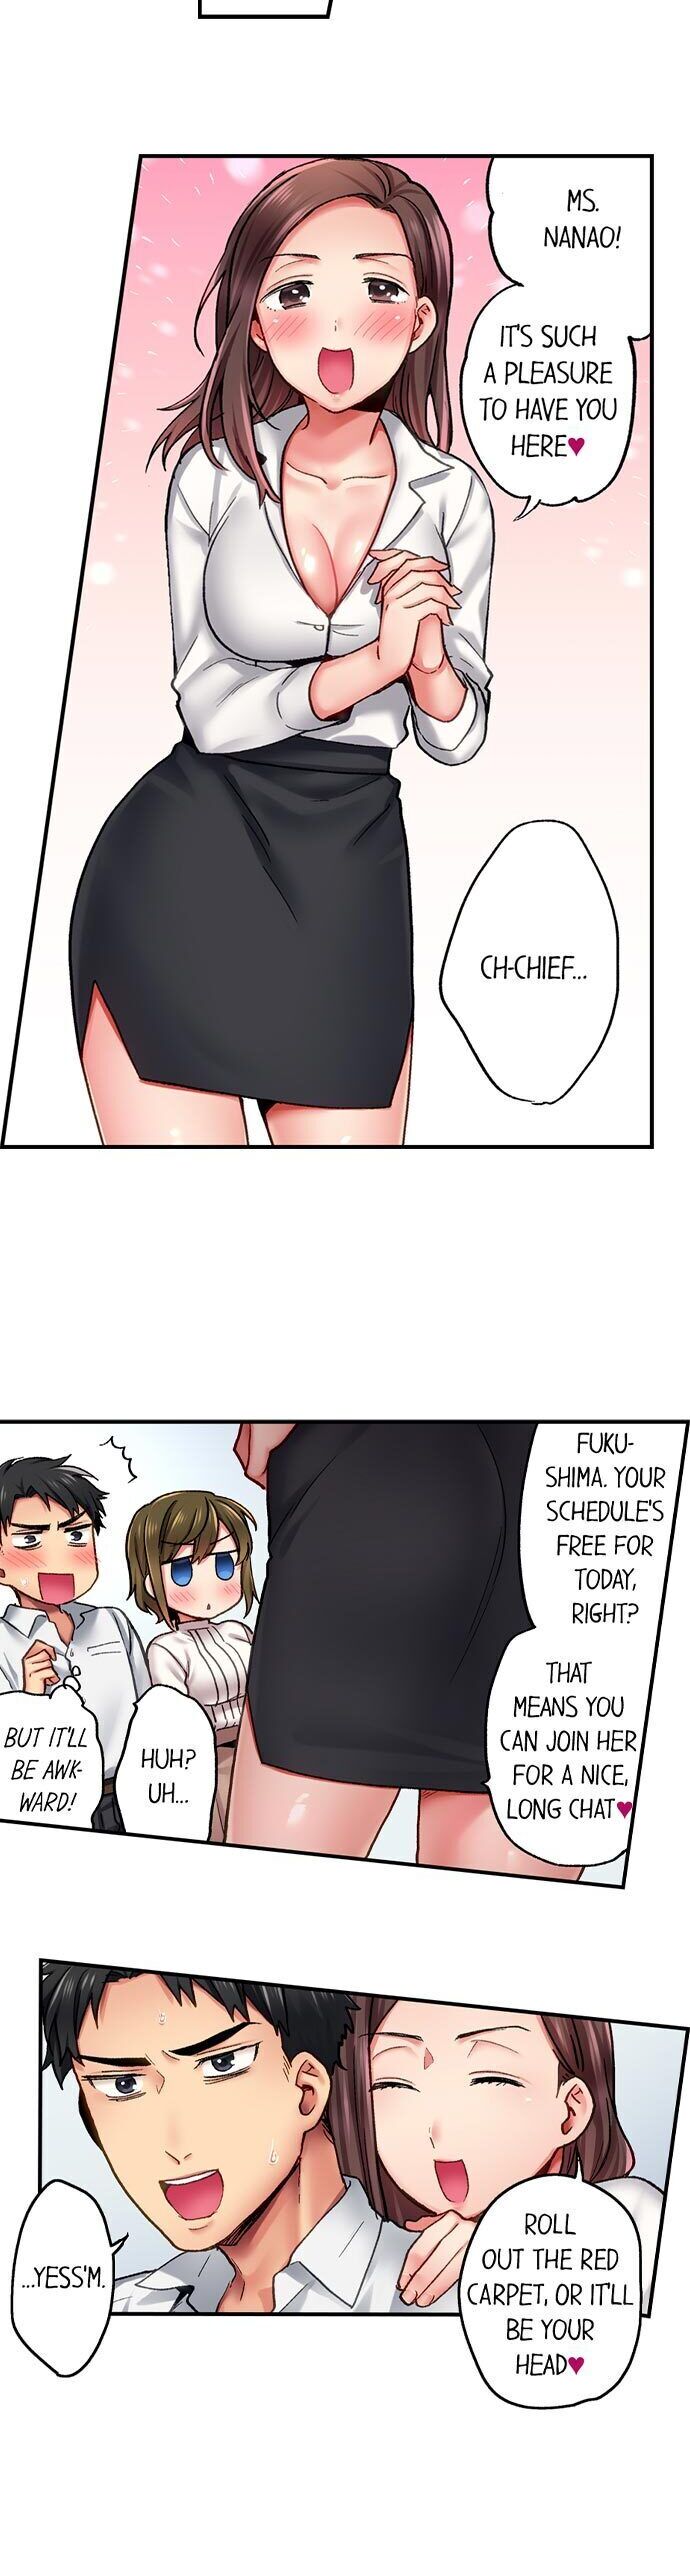 From Poker Face to Cumming Face in 90 Seconds - Chapter 4 Page 5